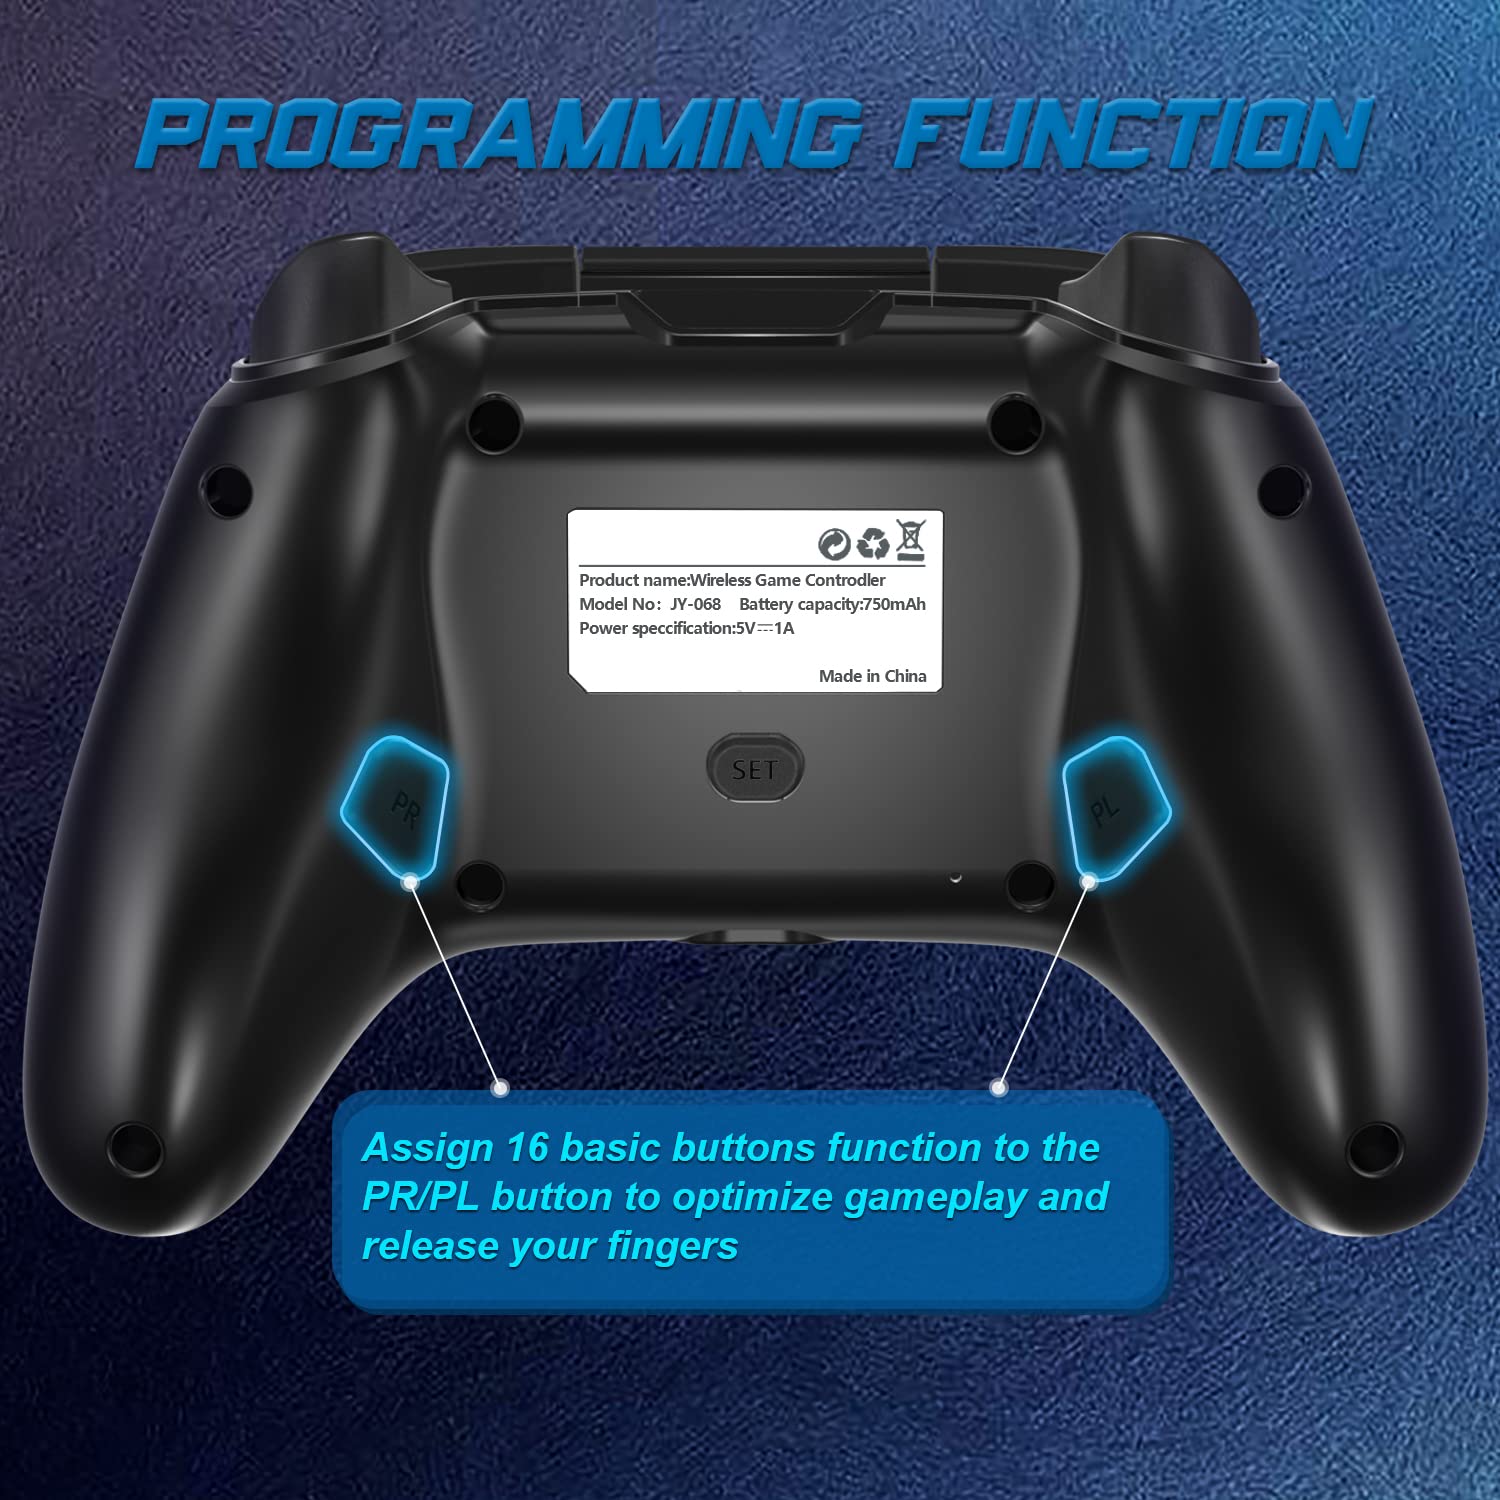 Gamrombo Wireless Pro Controller for Switch/PC/PS3/Android TV, PC Game Controller with Dual Vibration/Gyro Axis, Multi-Platform &Multi-Connections